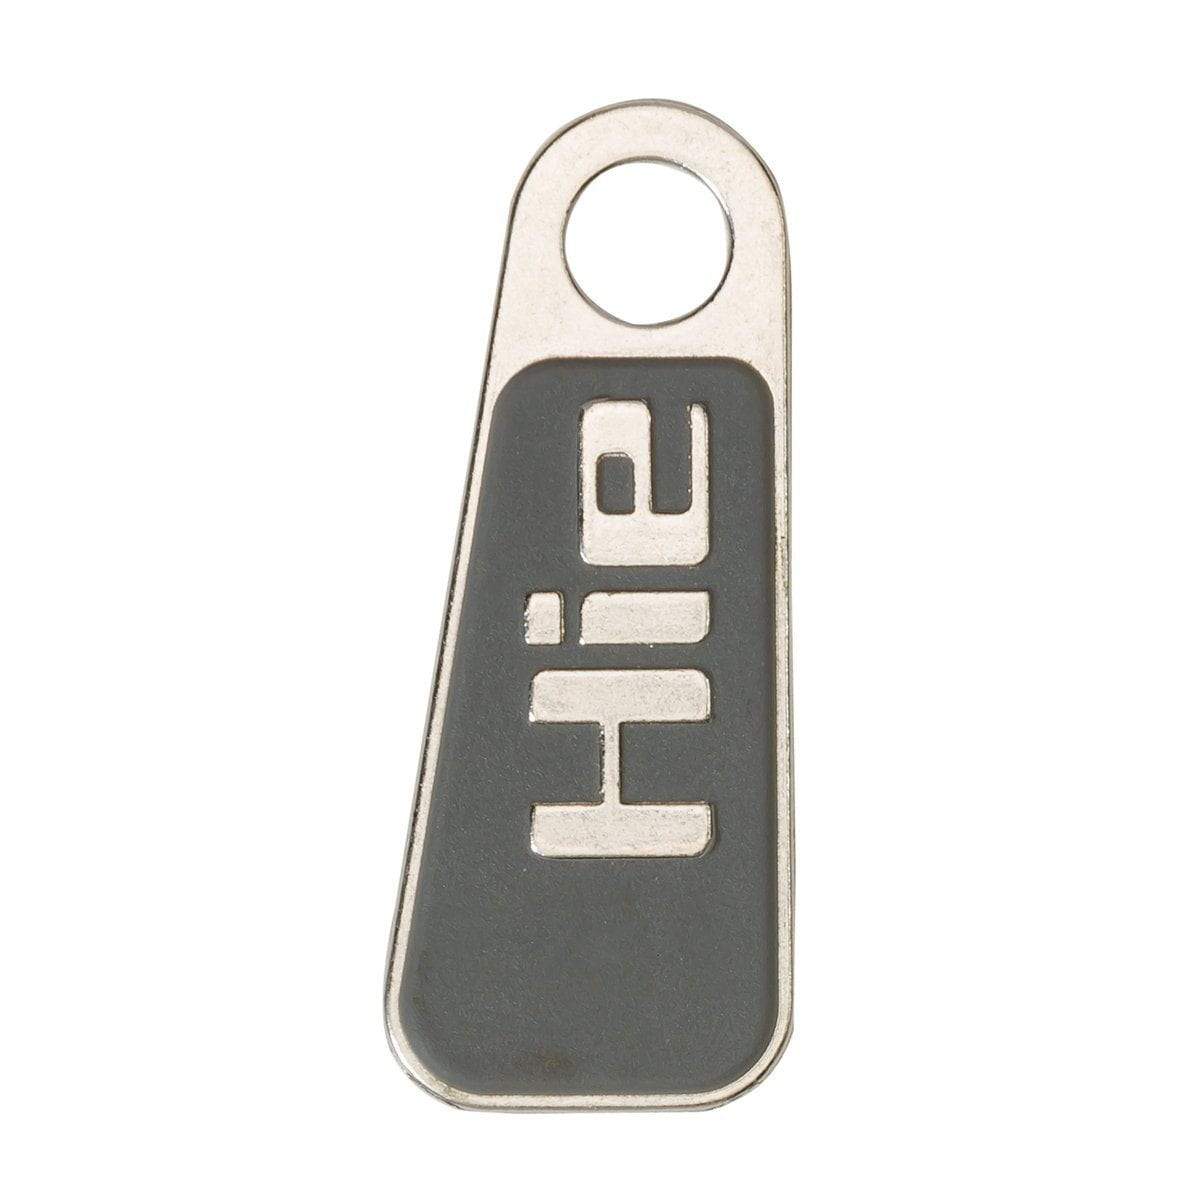 The Hie magnetic Key Fob. 